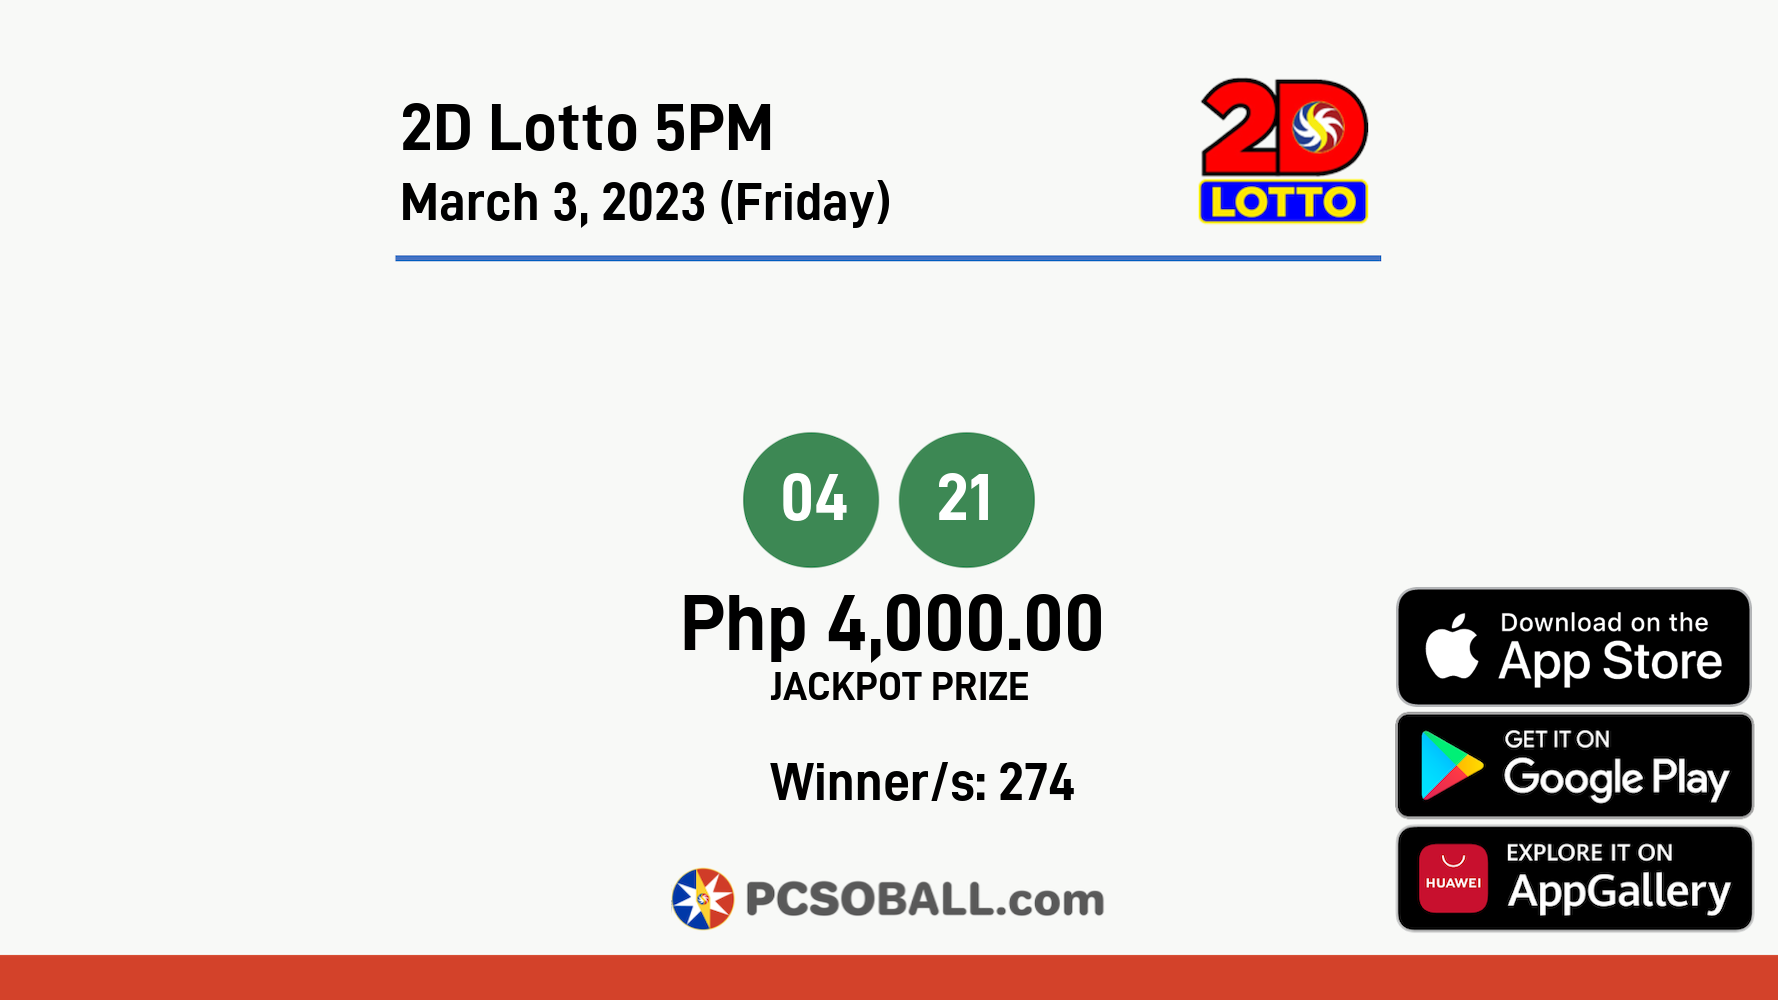 2D Lotto 5PM March 3, 2023 (Friday) Result